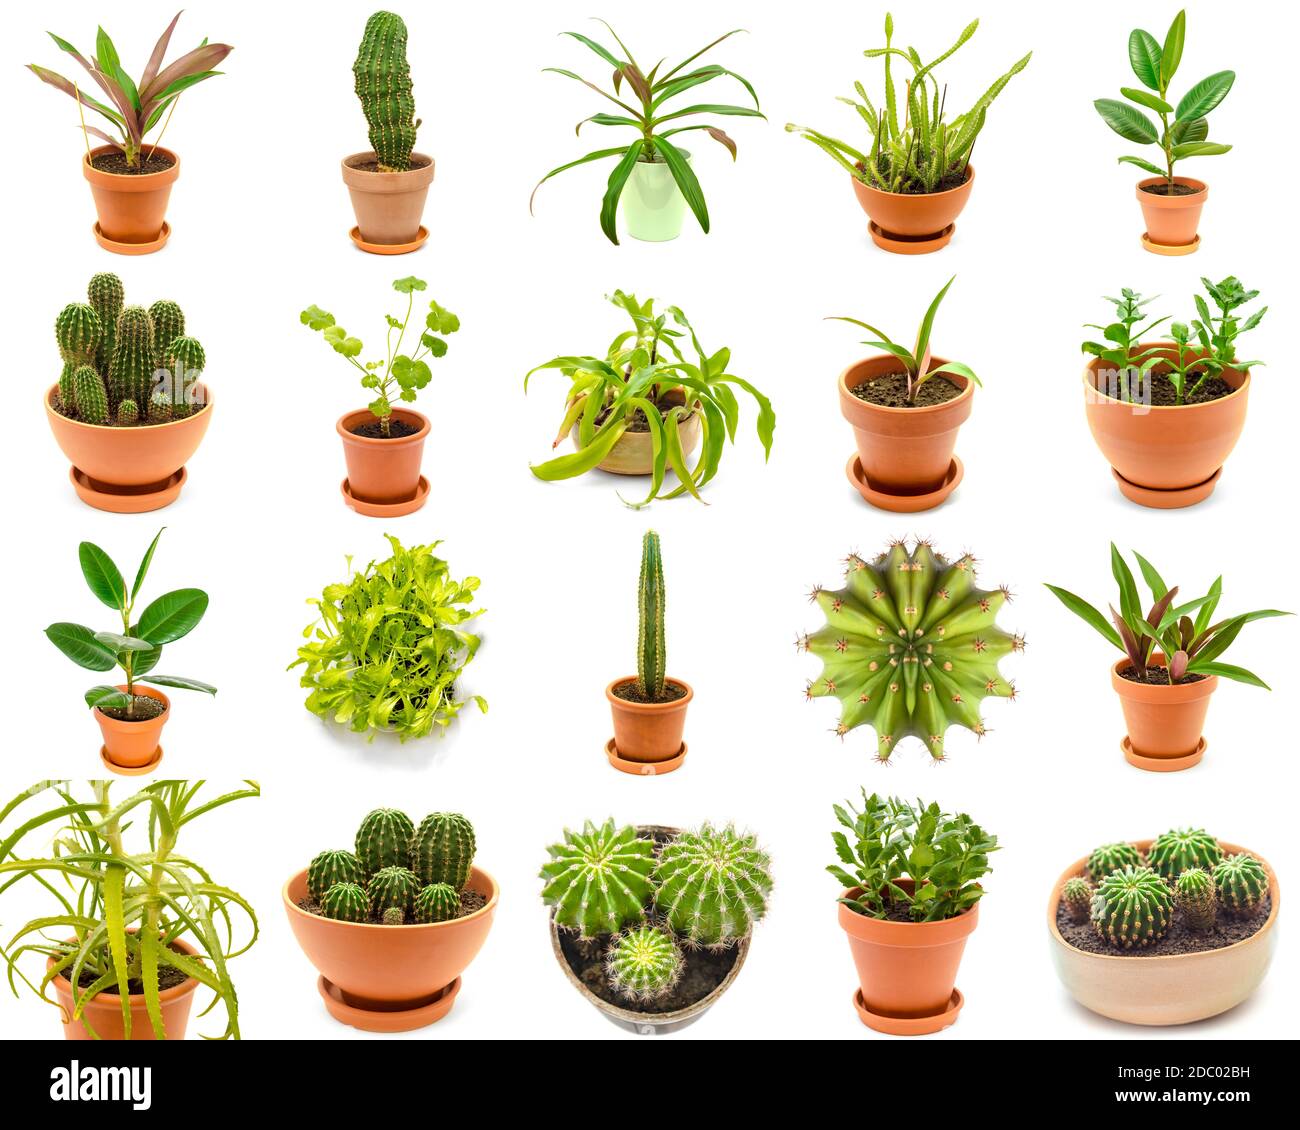 plants collection isolated on a white background Stock Photo